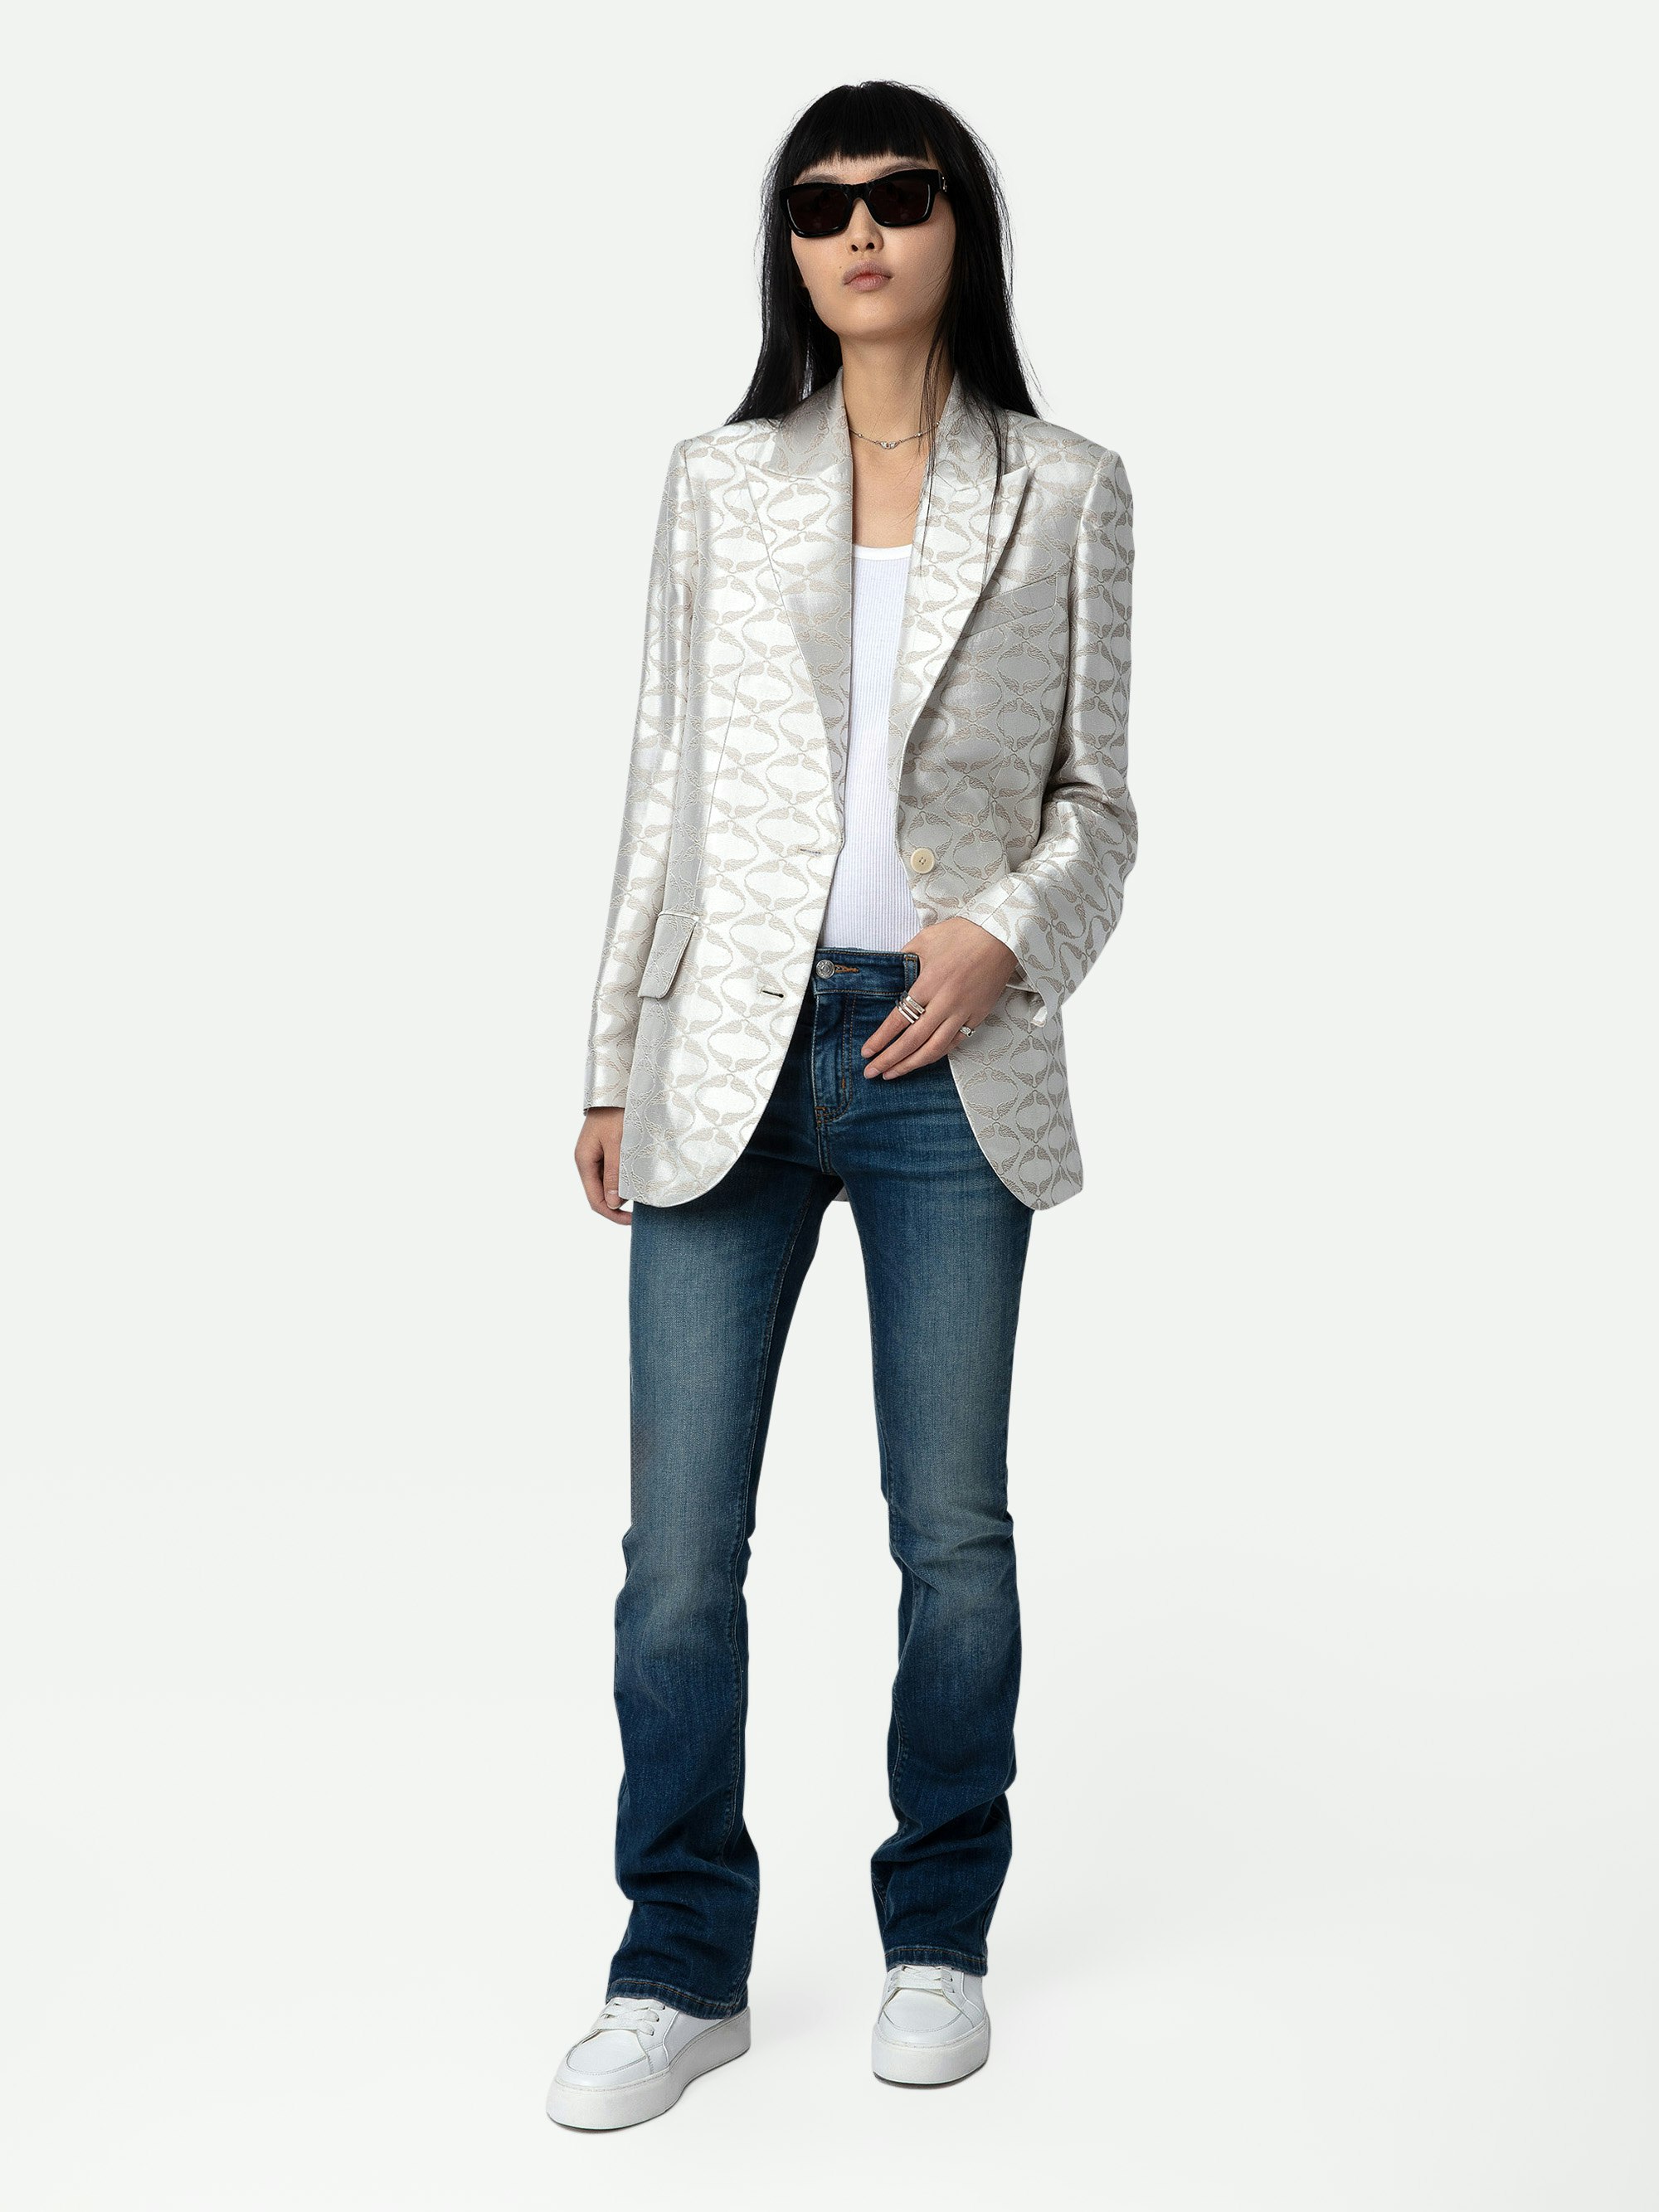 Vicka Wings Jacquard Blazer - Grey tailored jacket with tailored collar, button closure and jacquard wings.